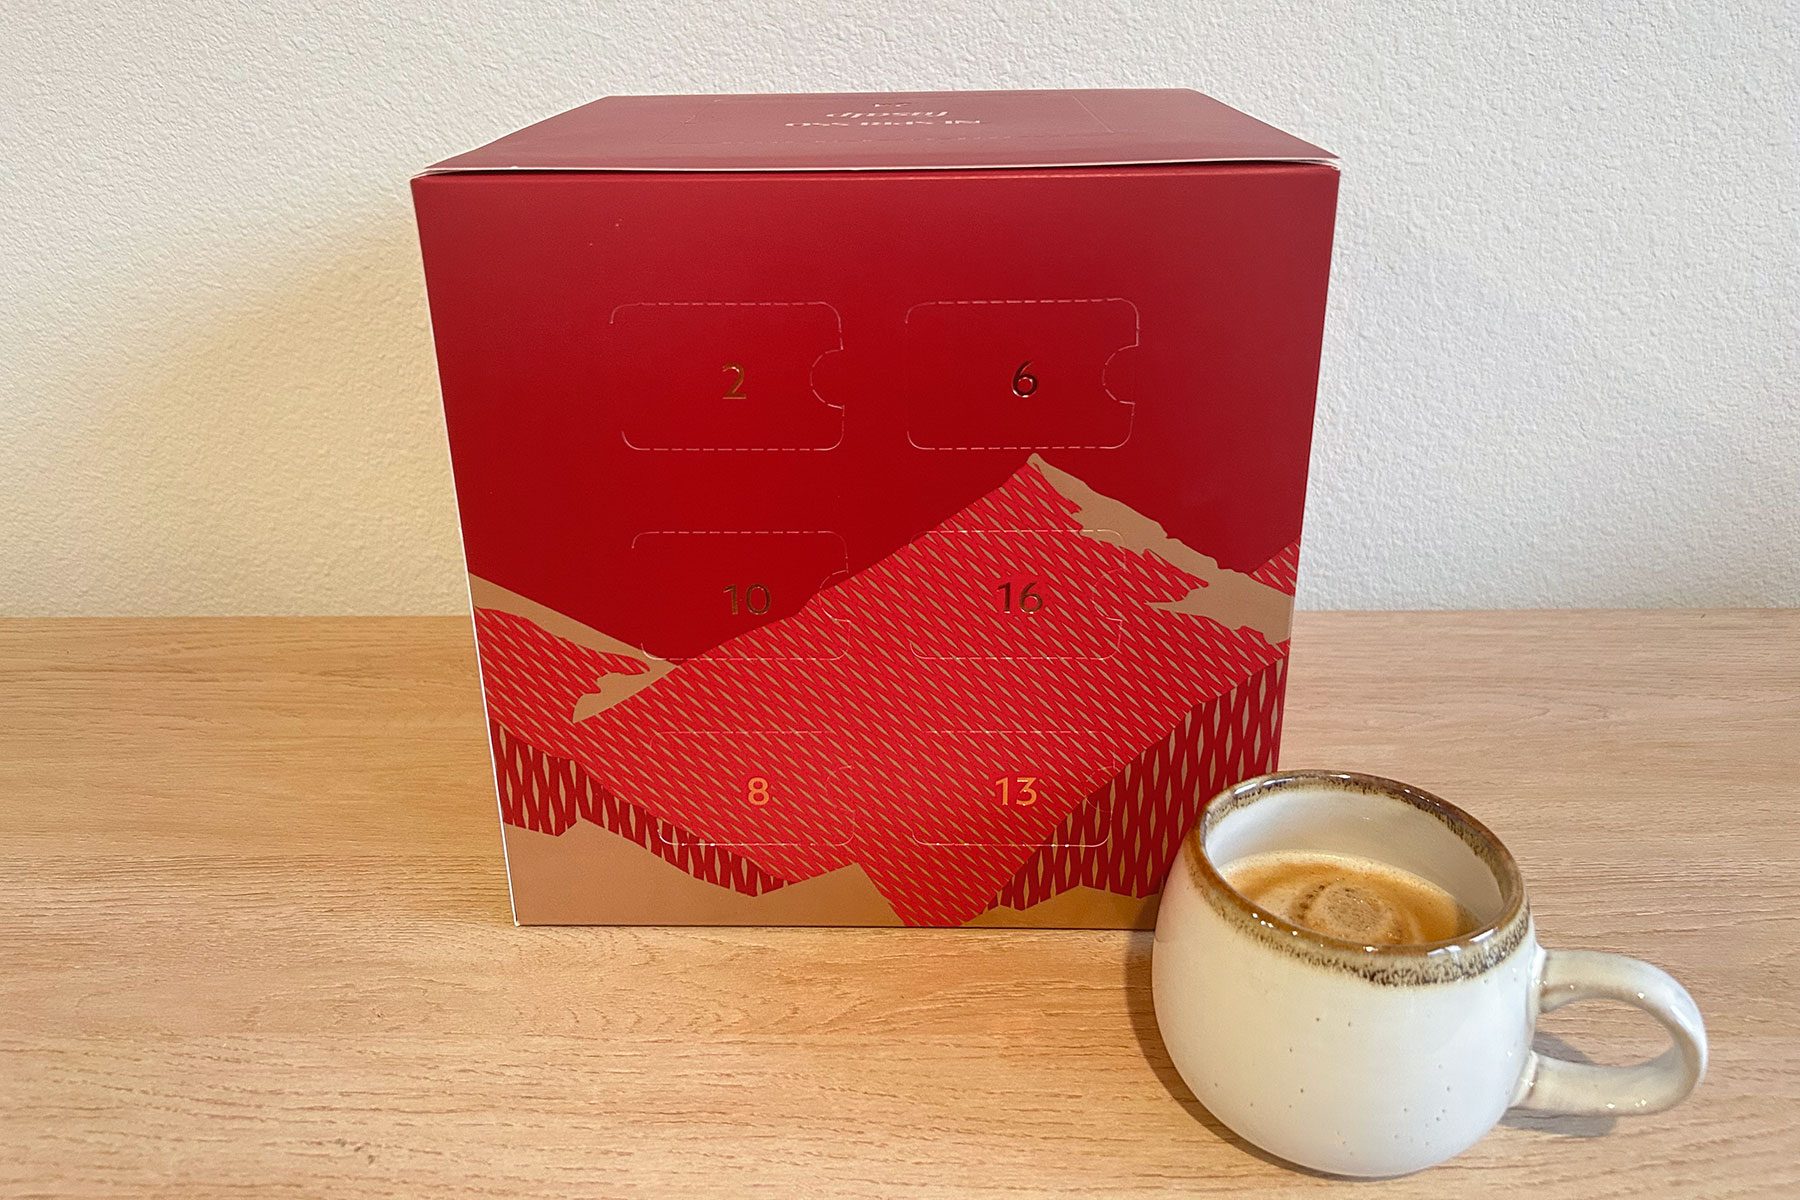 Nespresso Coffee Pod Box with Cup of Coffee